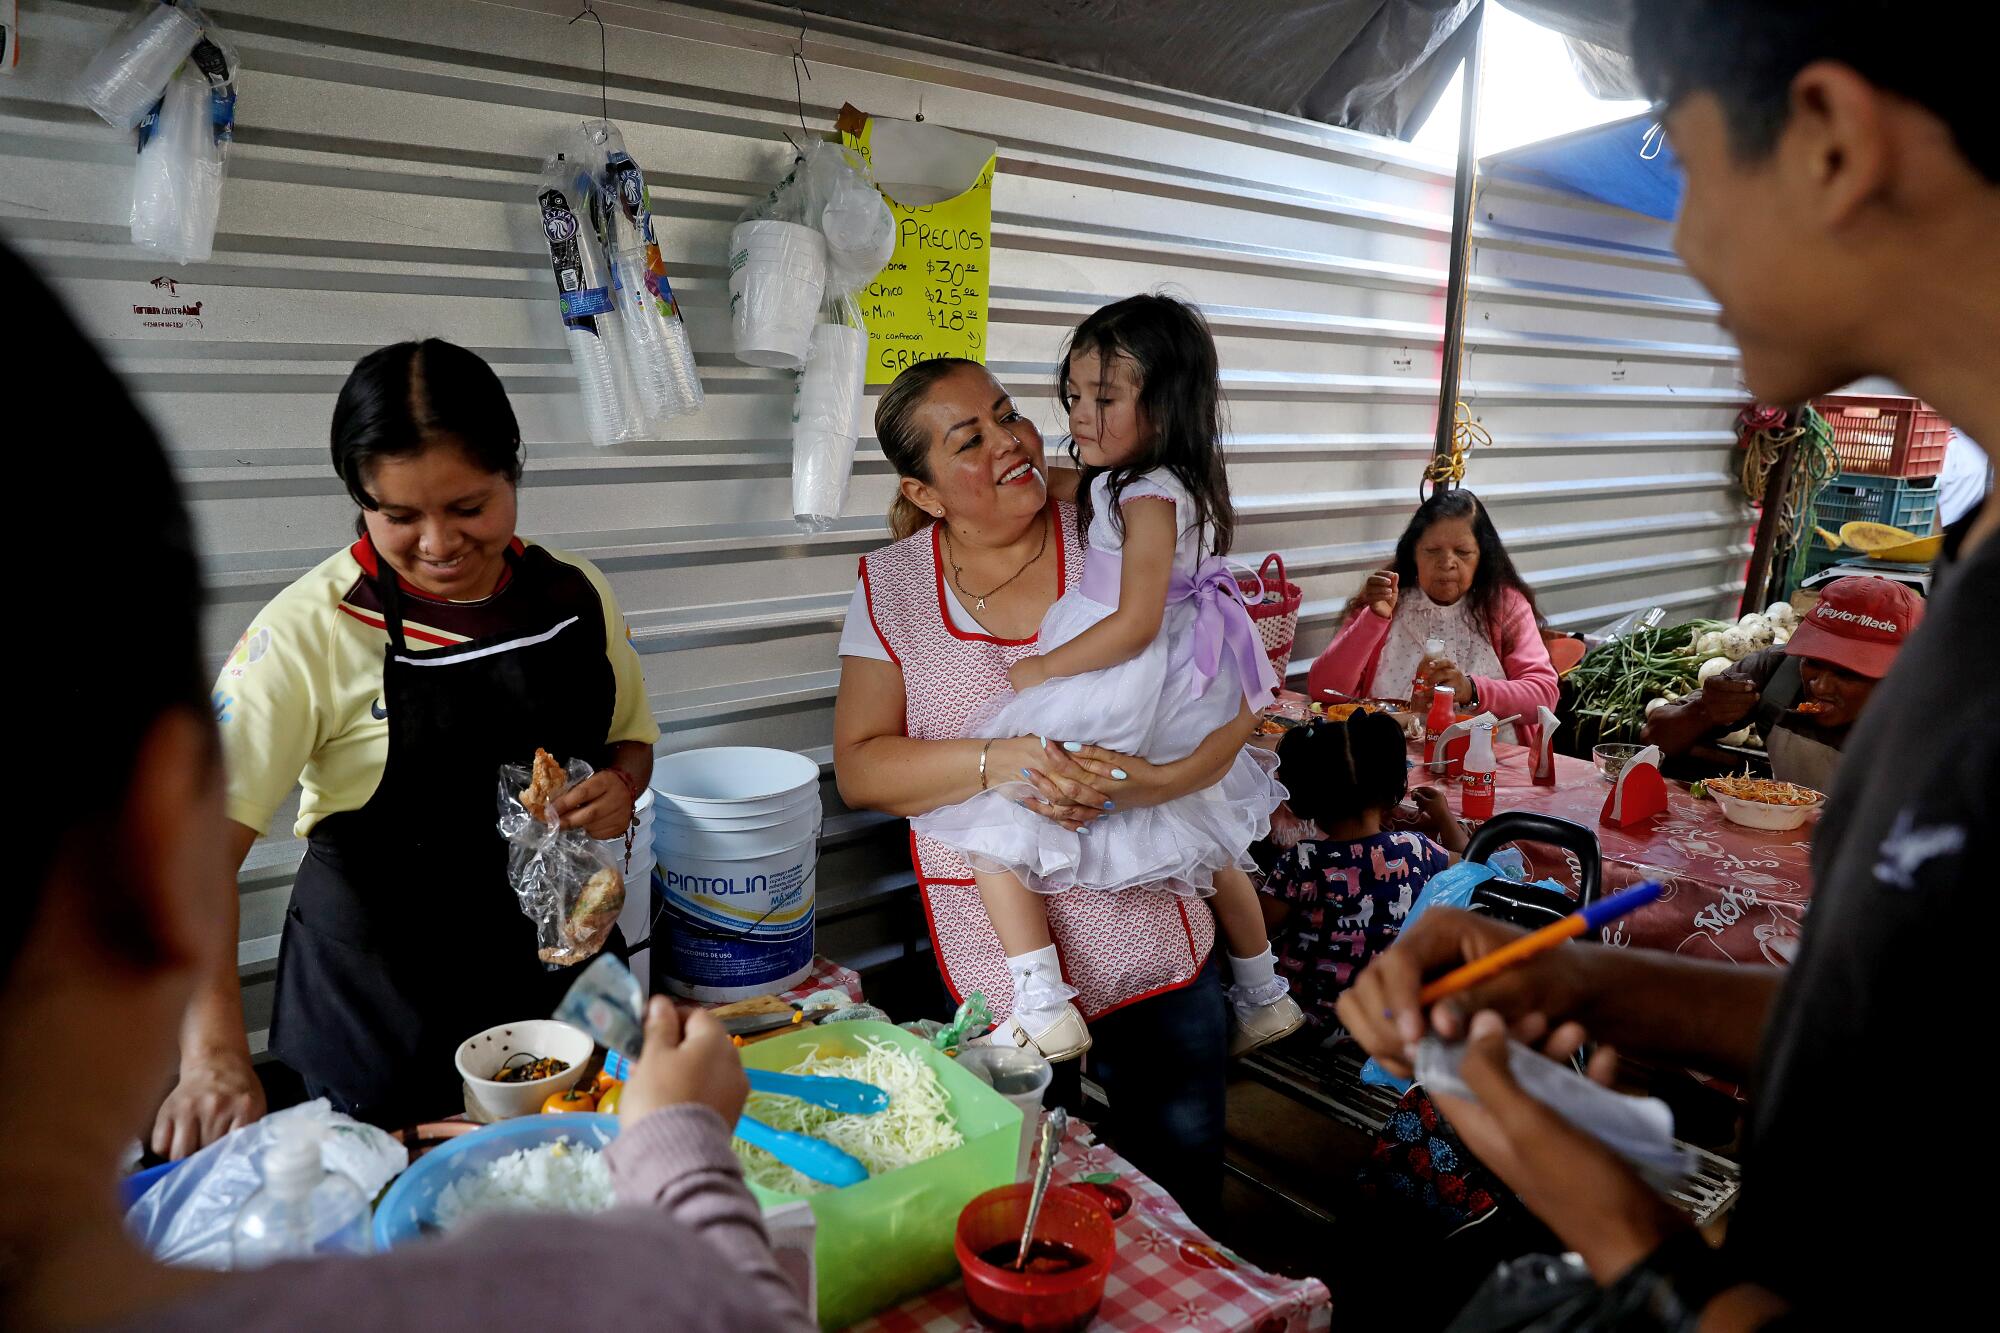 Josefina Rodriguez hoists granddaughter, Sofia, at her pozole at the town market in Pátzcuaro.